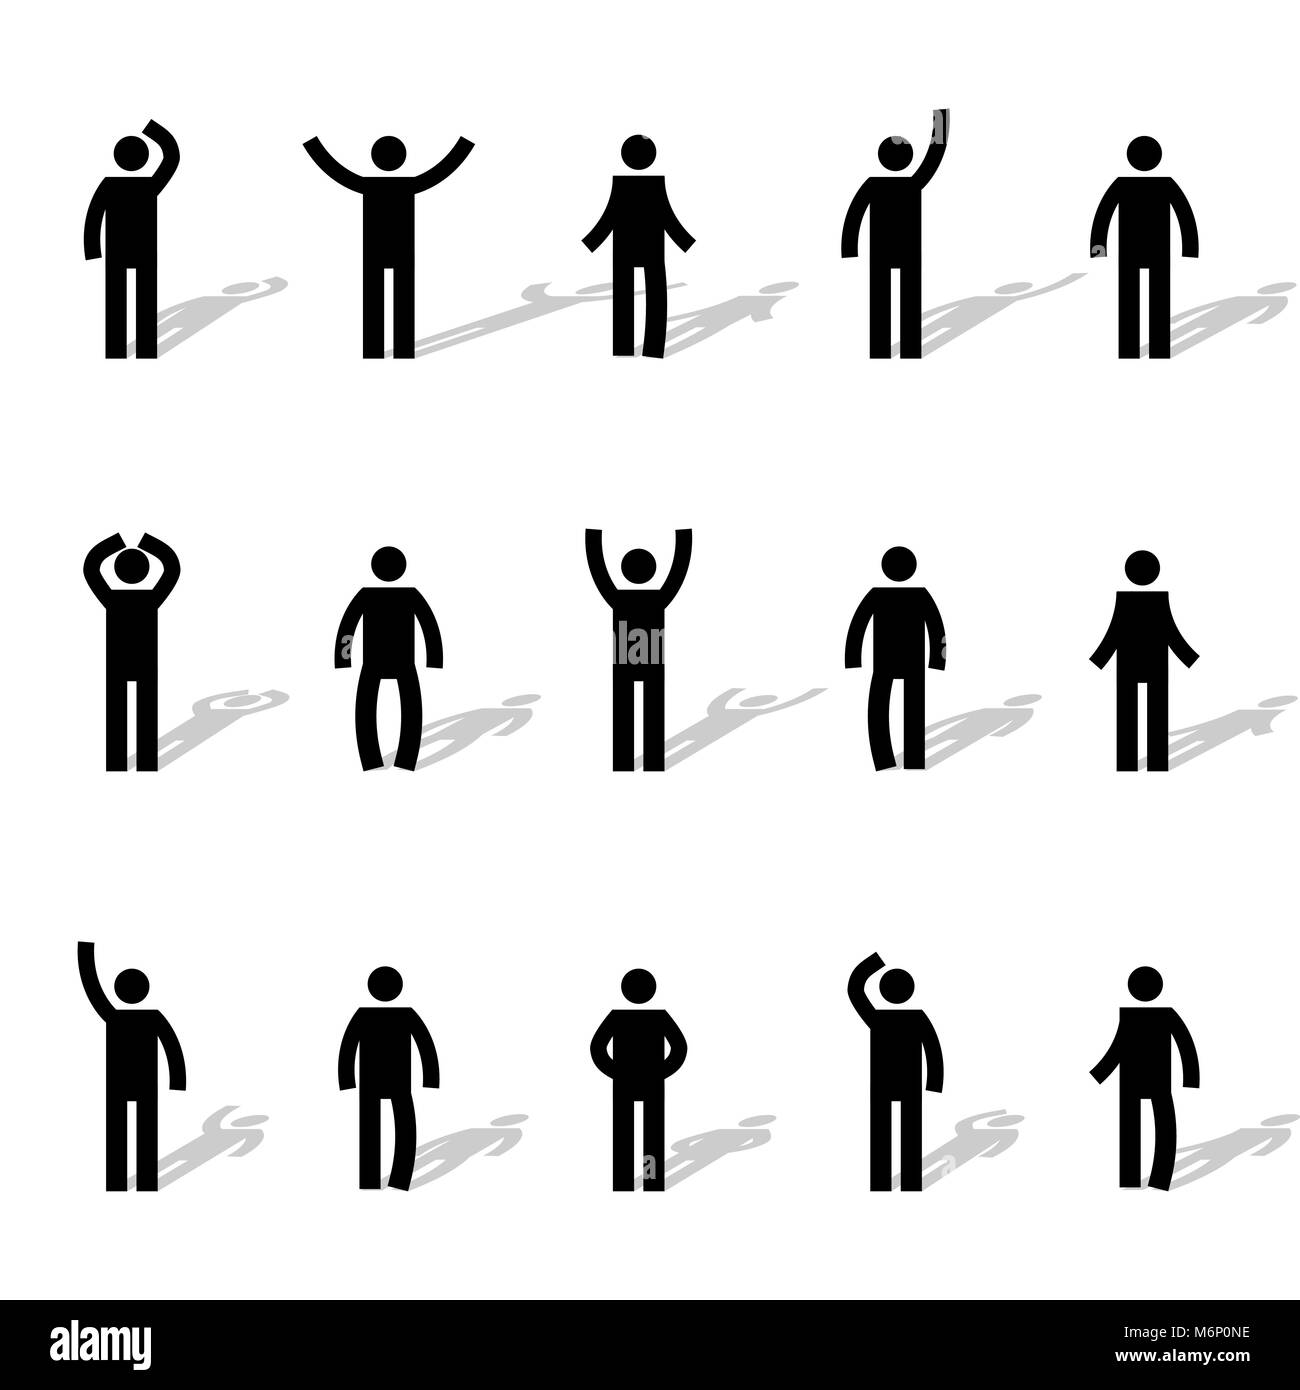 Stickman Stick Figure Pointing Showing Directions Stock Vector -  Illustration of stick, gesturing: 38950978